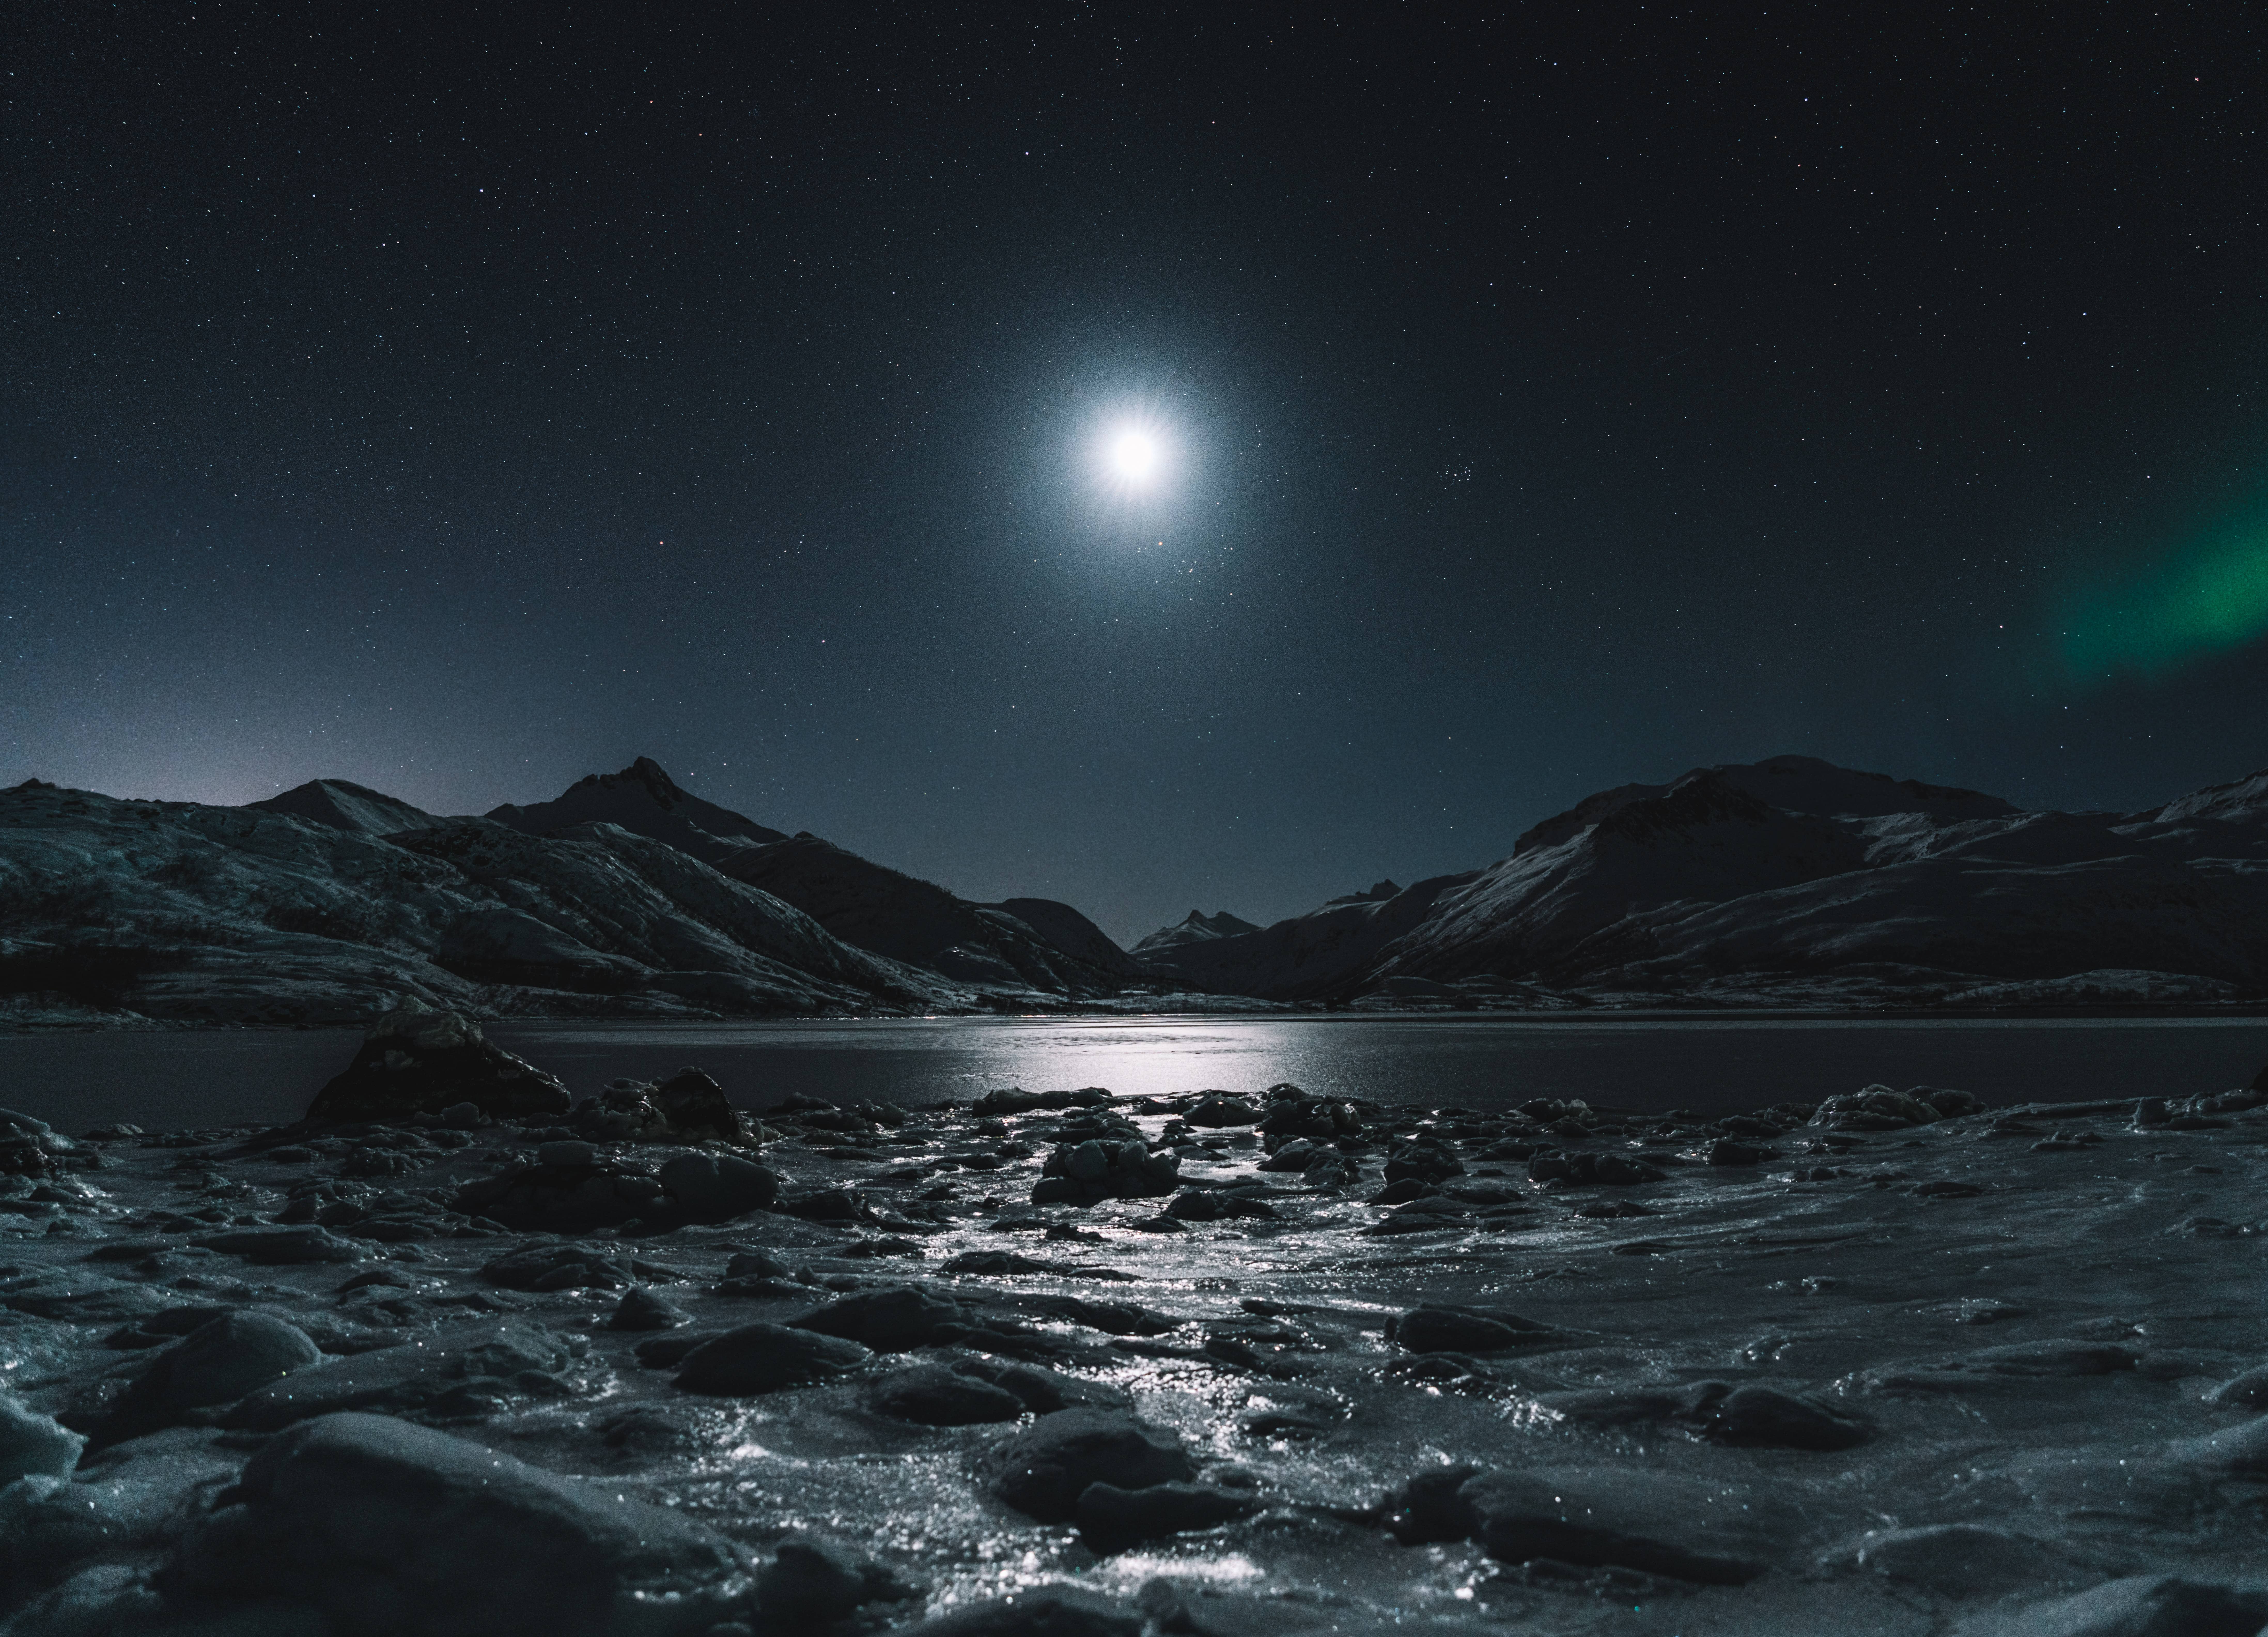 rocky shoreline with mountains in the distance, lit by a full moon in the center